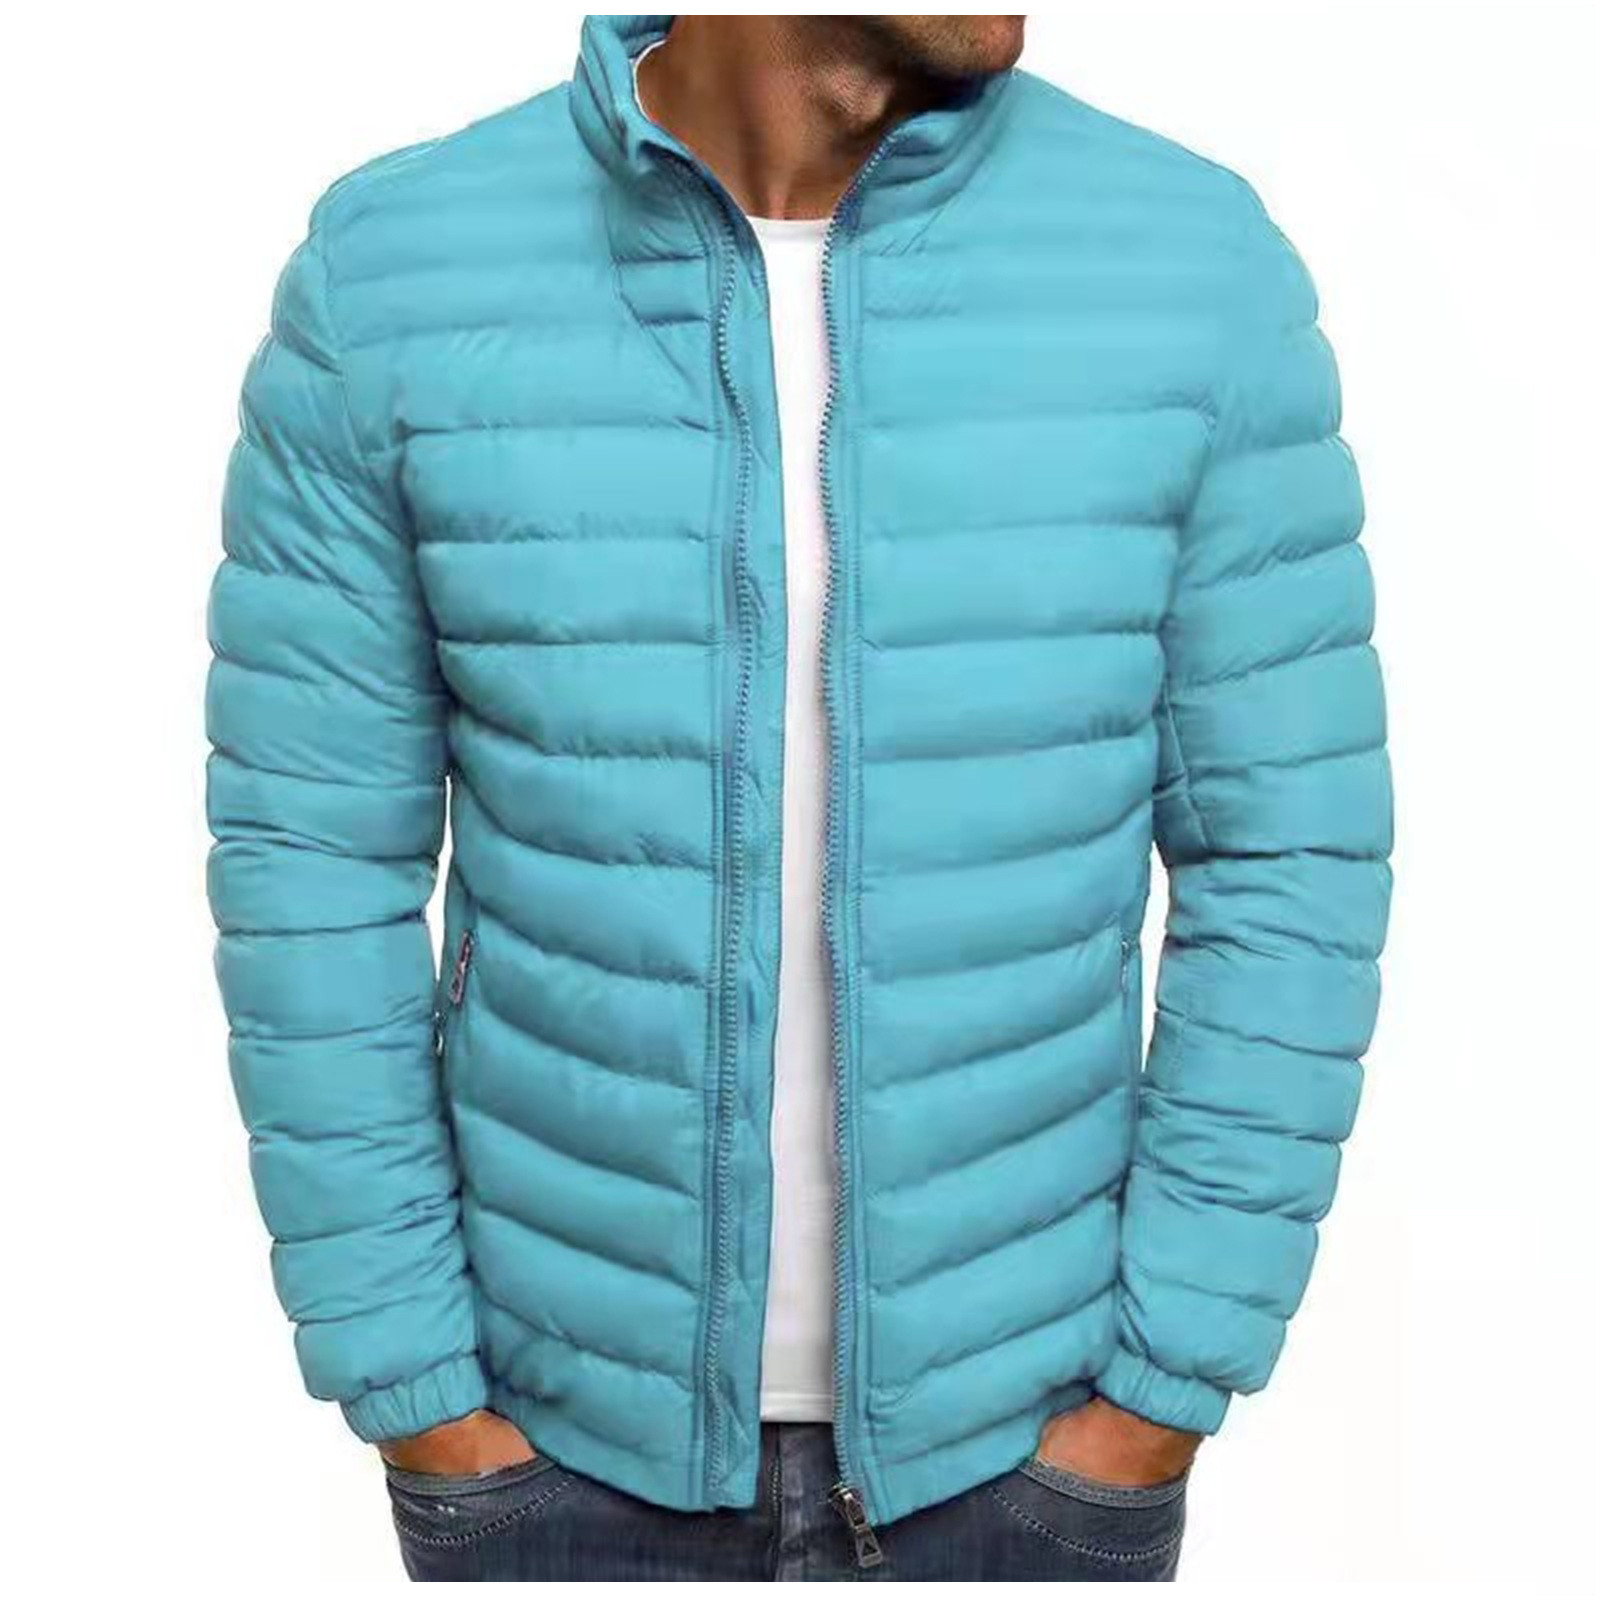 Chiccall Puffer Jackets for Men, Solid Lightweight Packable Jacket ...